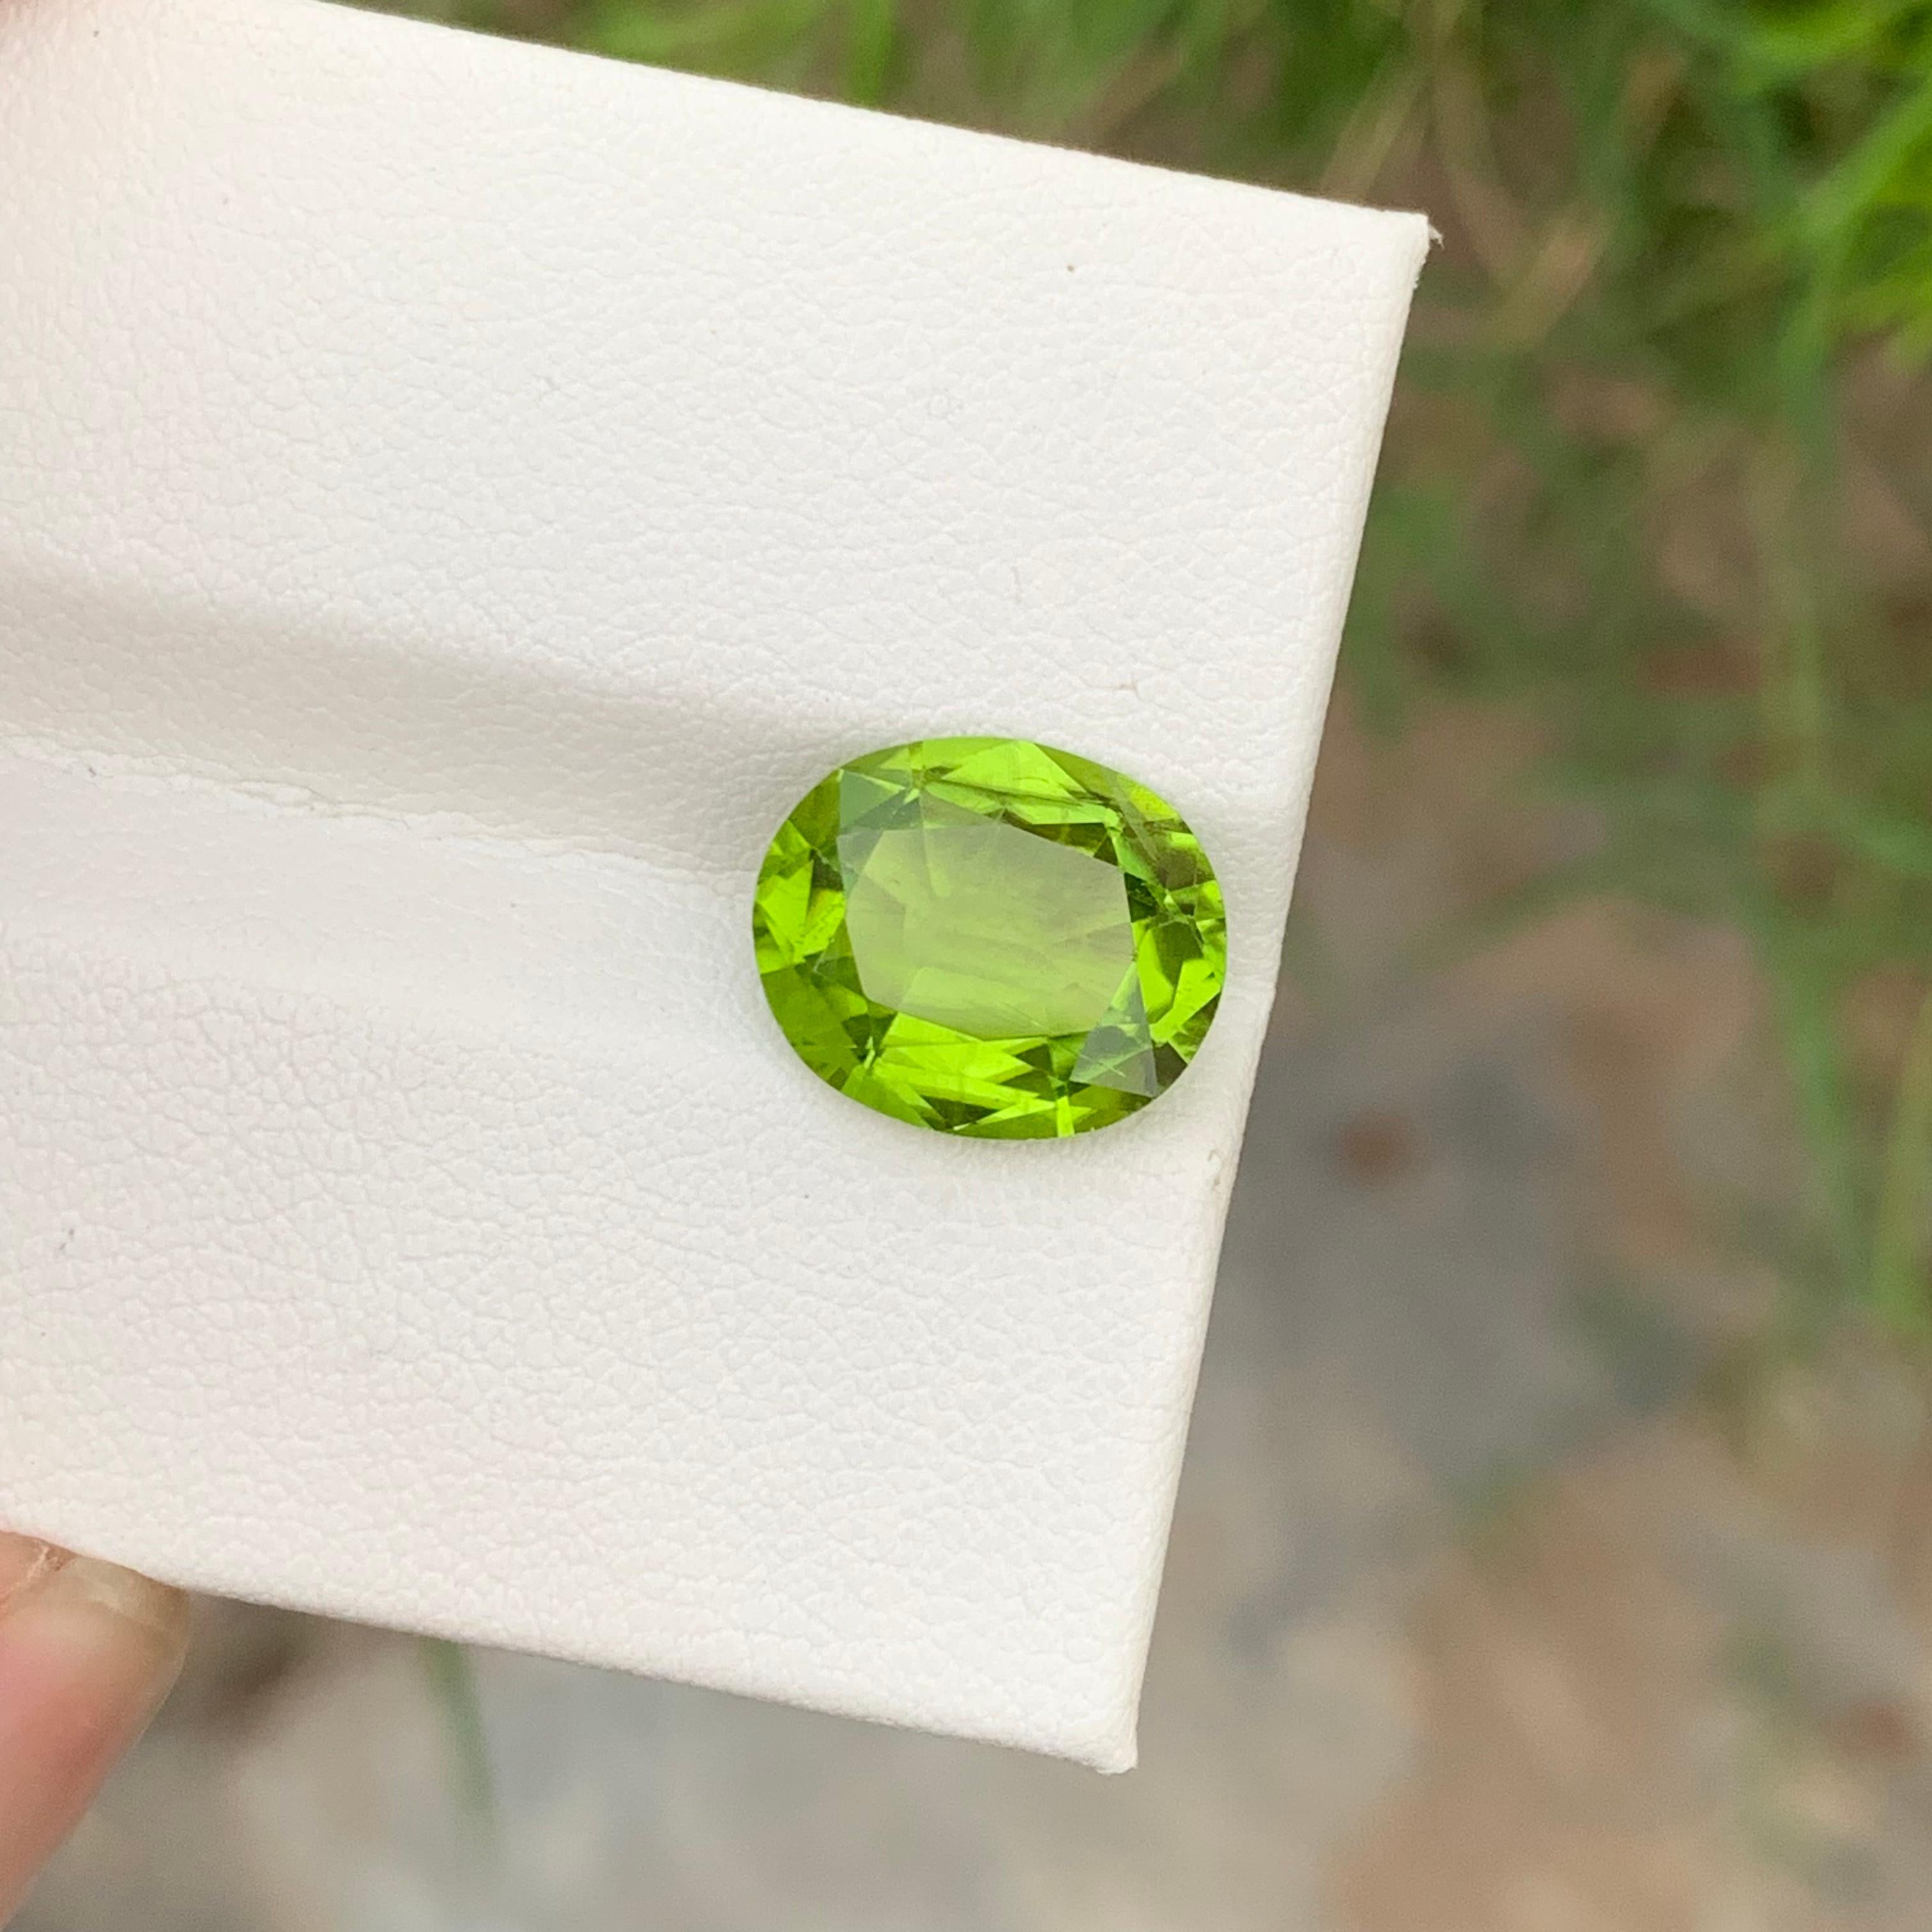 5.35 Carats Natural Apple Green Loose Peridot Gem From Suppart Valley Mine For Sale 5